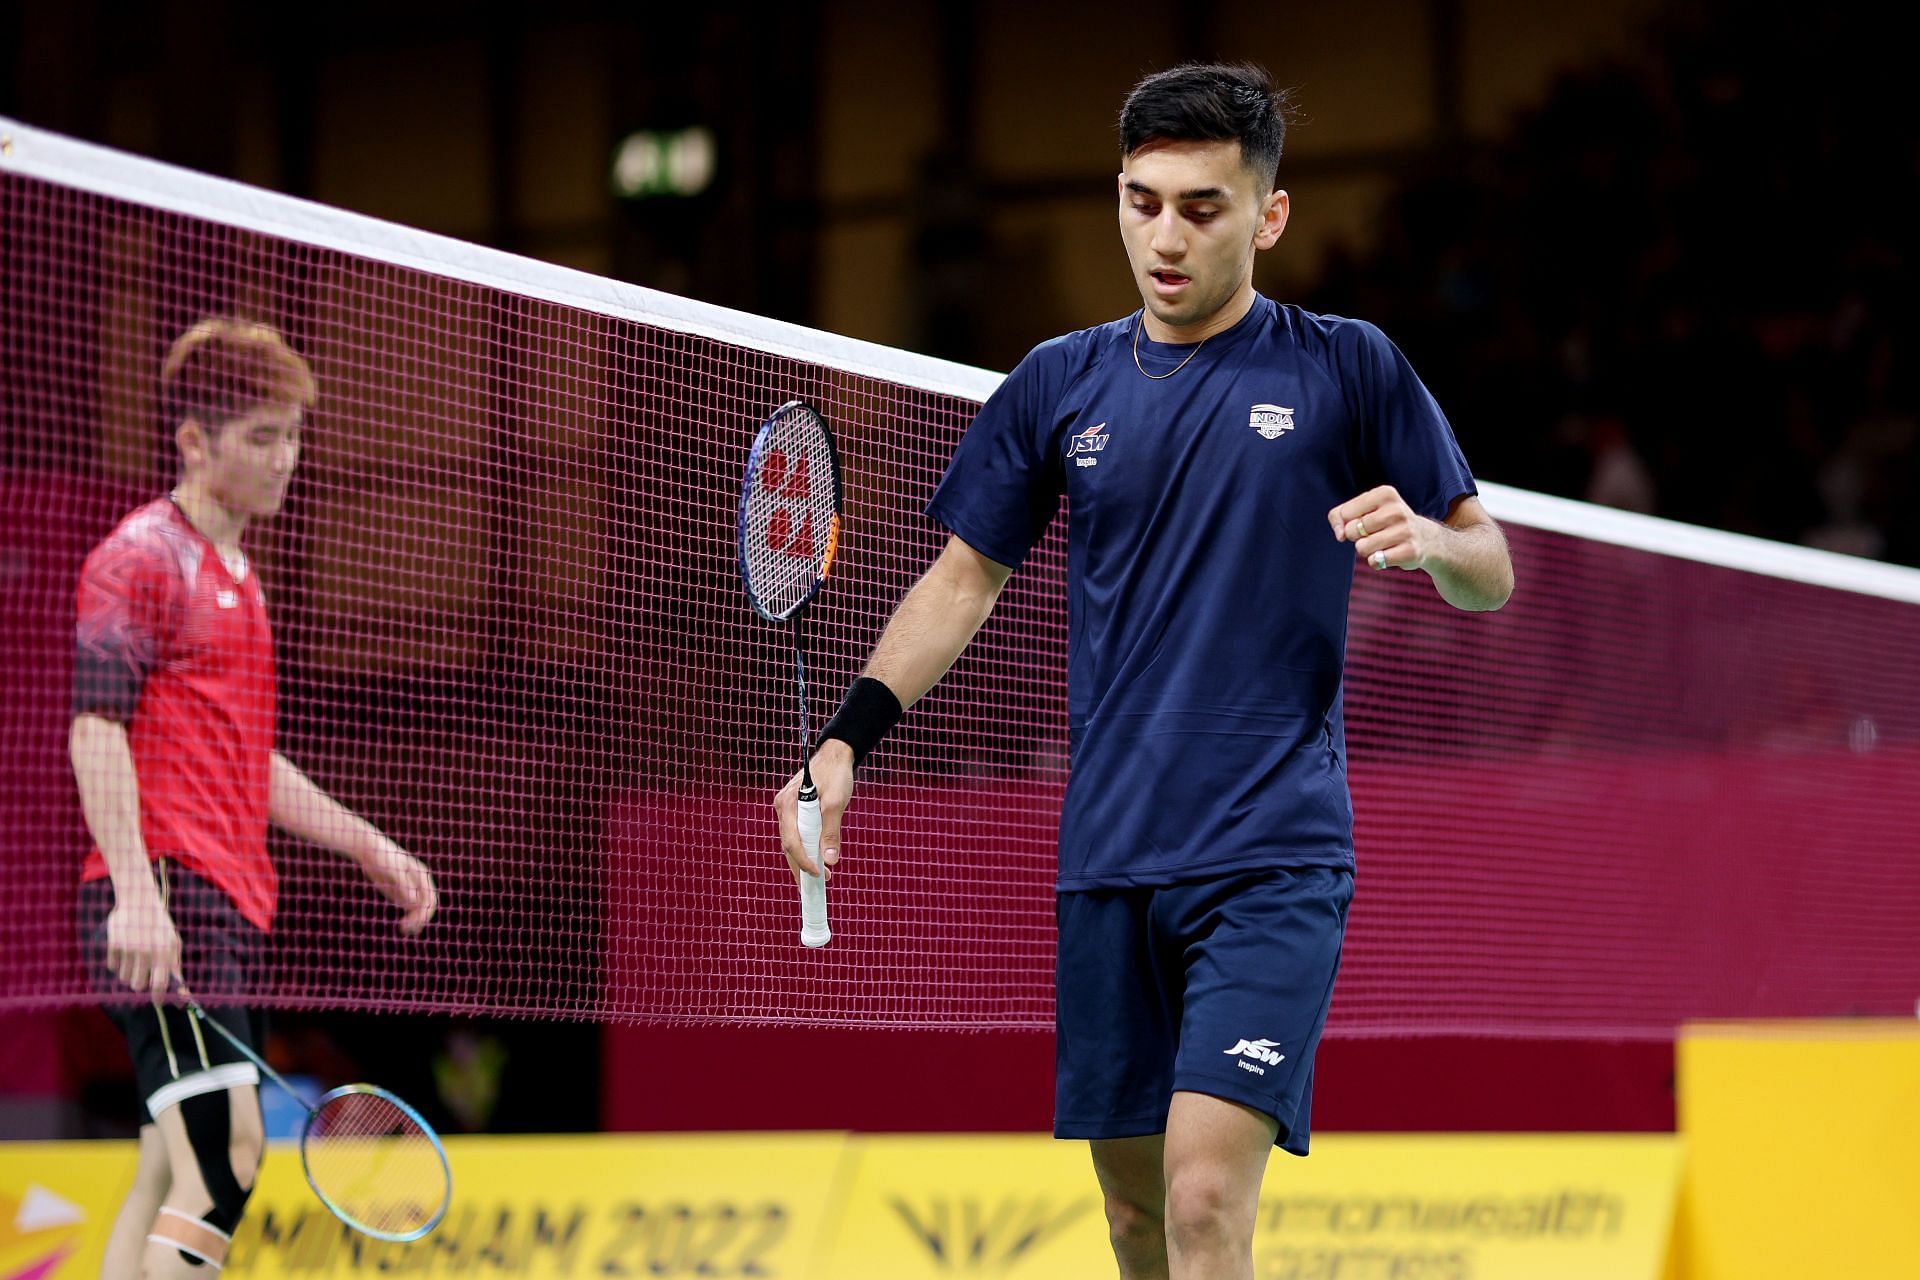 Lakshya Sen is back in action at the Japan Open (Image: Getty)